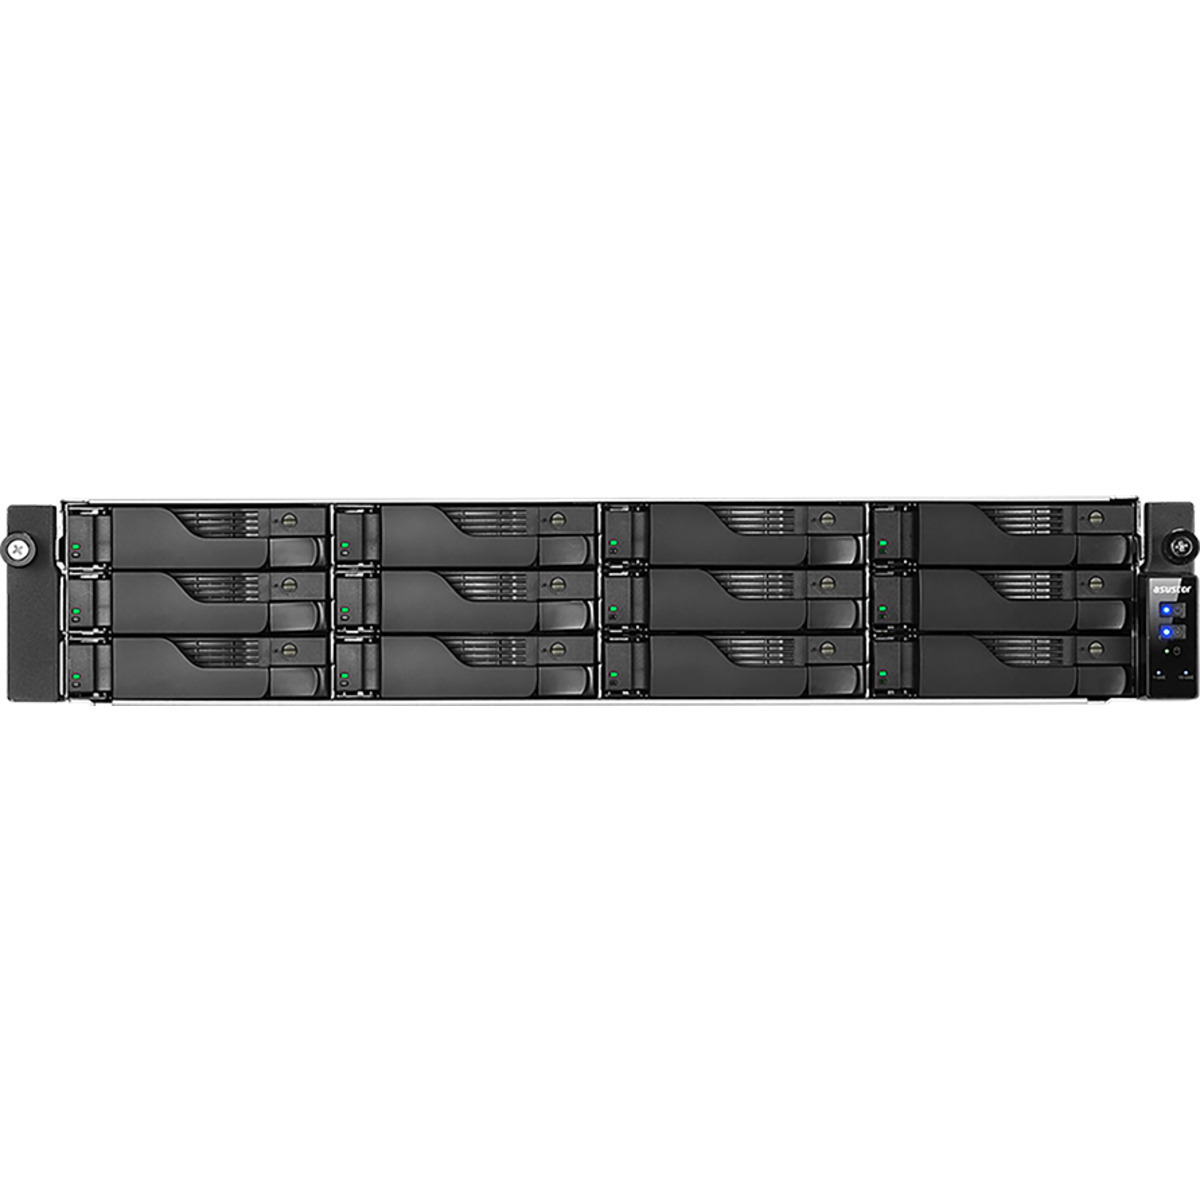 buy $4006 ASUSTOR LOCKERSTOR 12RD AS6512RD 24tb RackMount NAS - Network Attached Storage Device 12x2000gb Seagate IronWolf Pro ST2000NT001 3.5 7200rpm SATA 6Gb/s HDD NAS Class Drives Installed - Burn-In Tested - FREE RAM UPGRADE - nas headquarters buy network attached storage server device das new raid-5 free shipping simply usa LOCKERSTOR 12RD AS6512RD